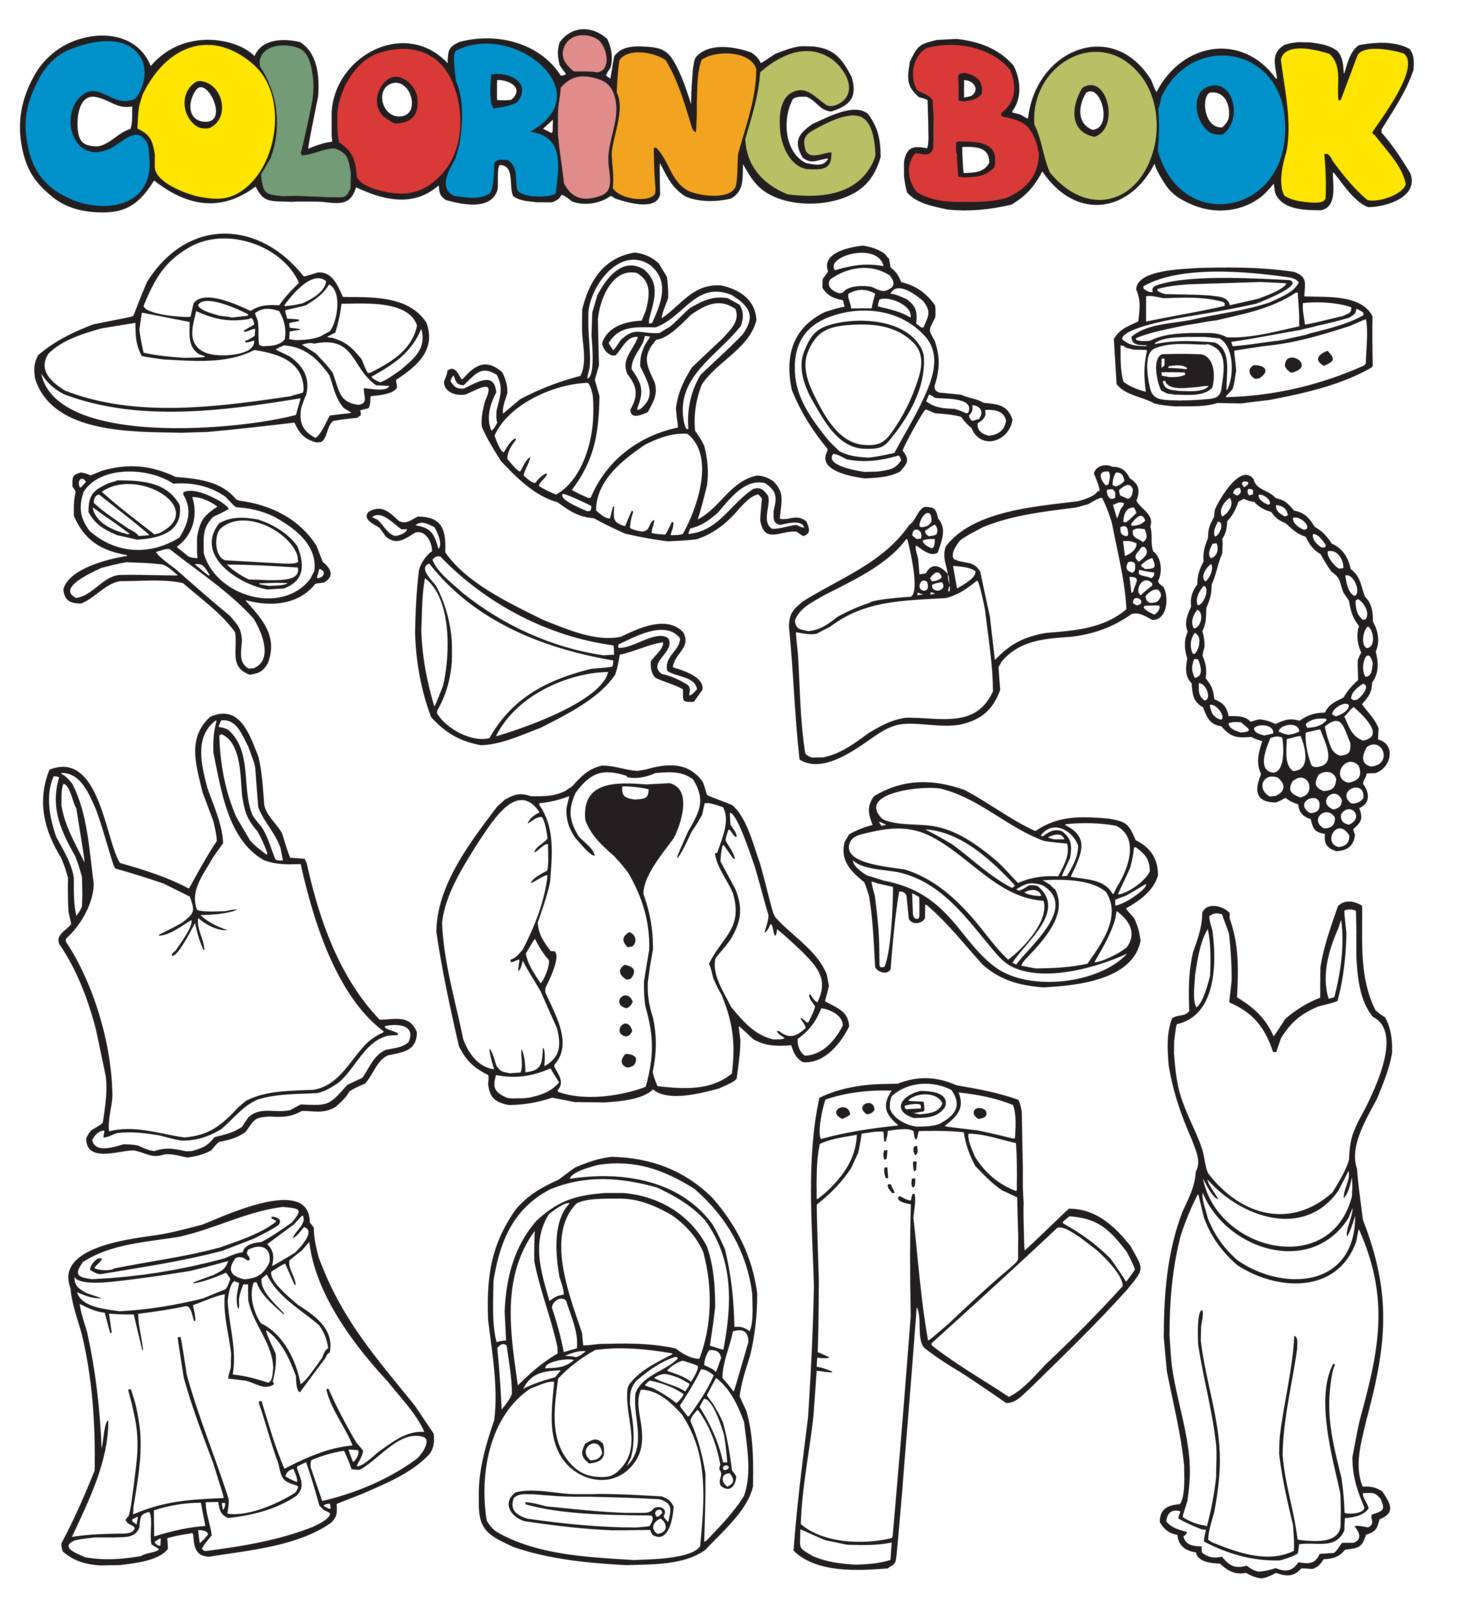 Coloring book with apparel 2 by clairev